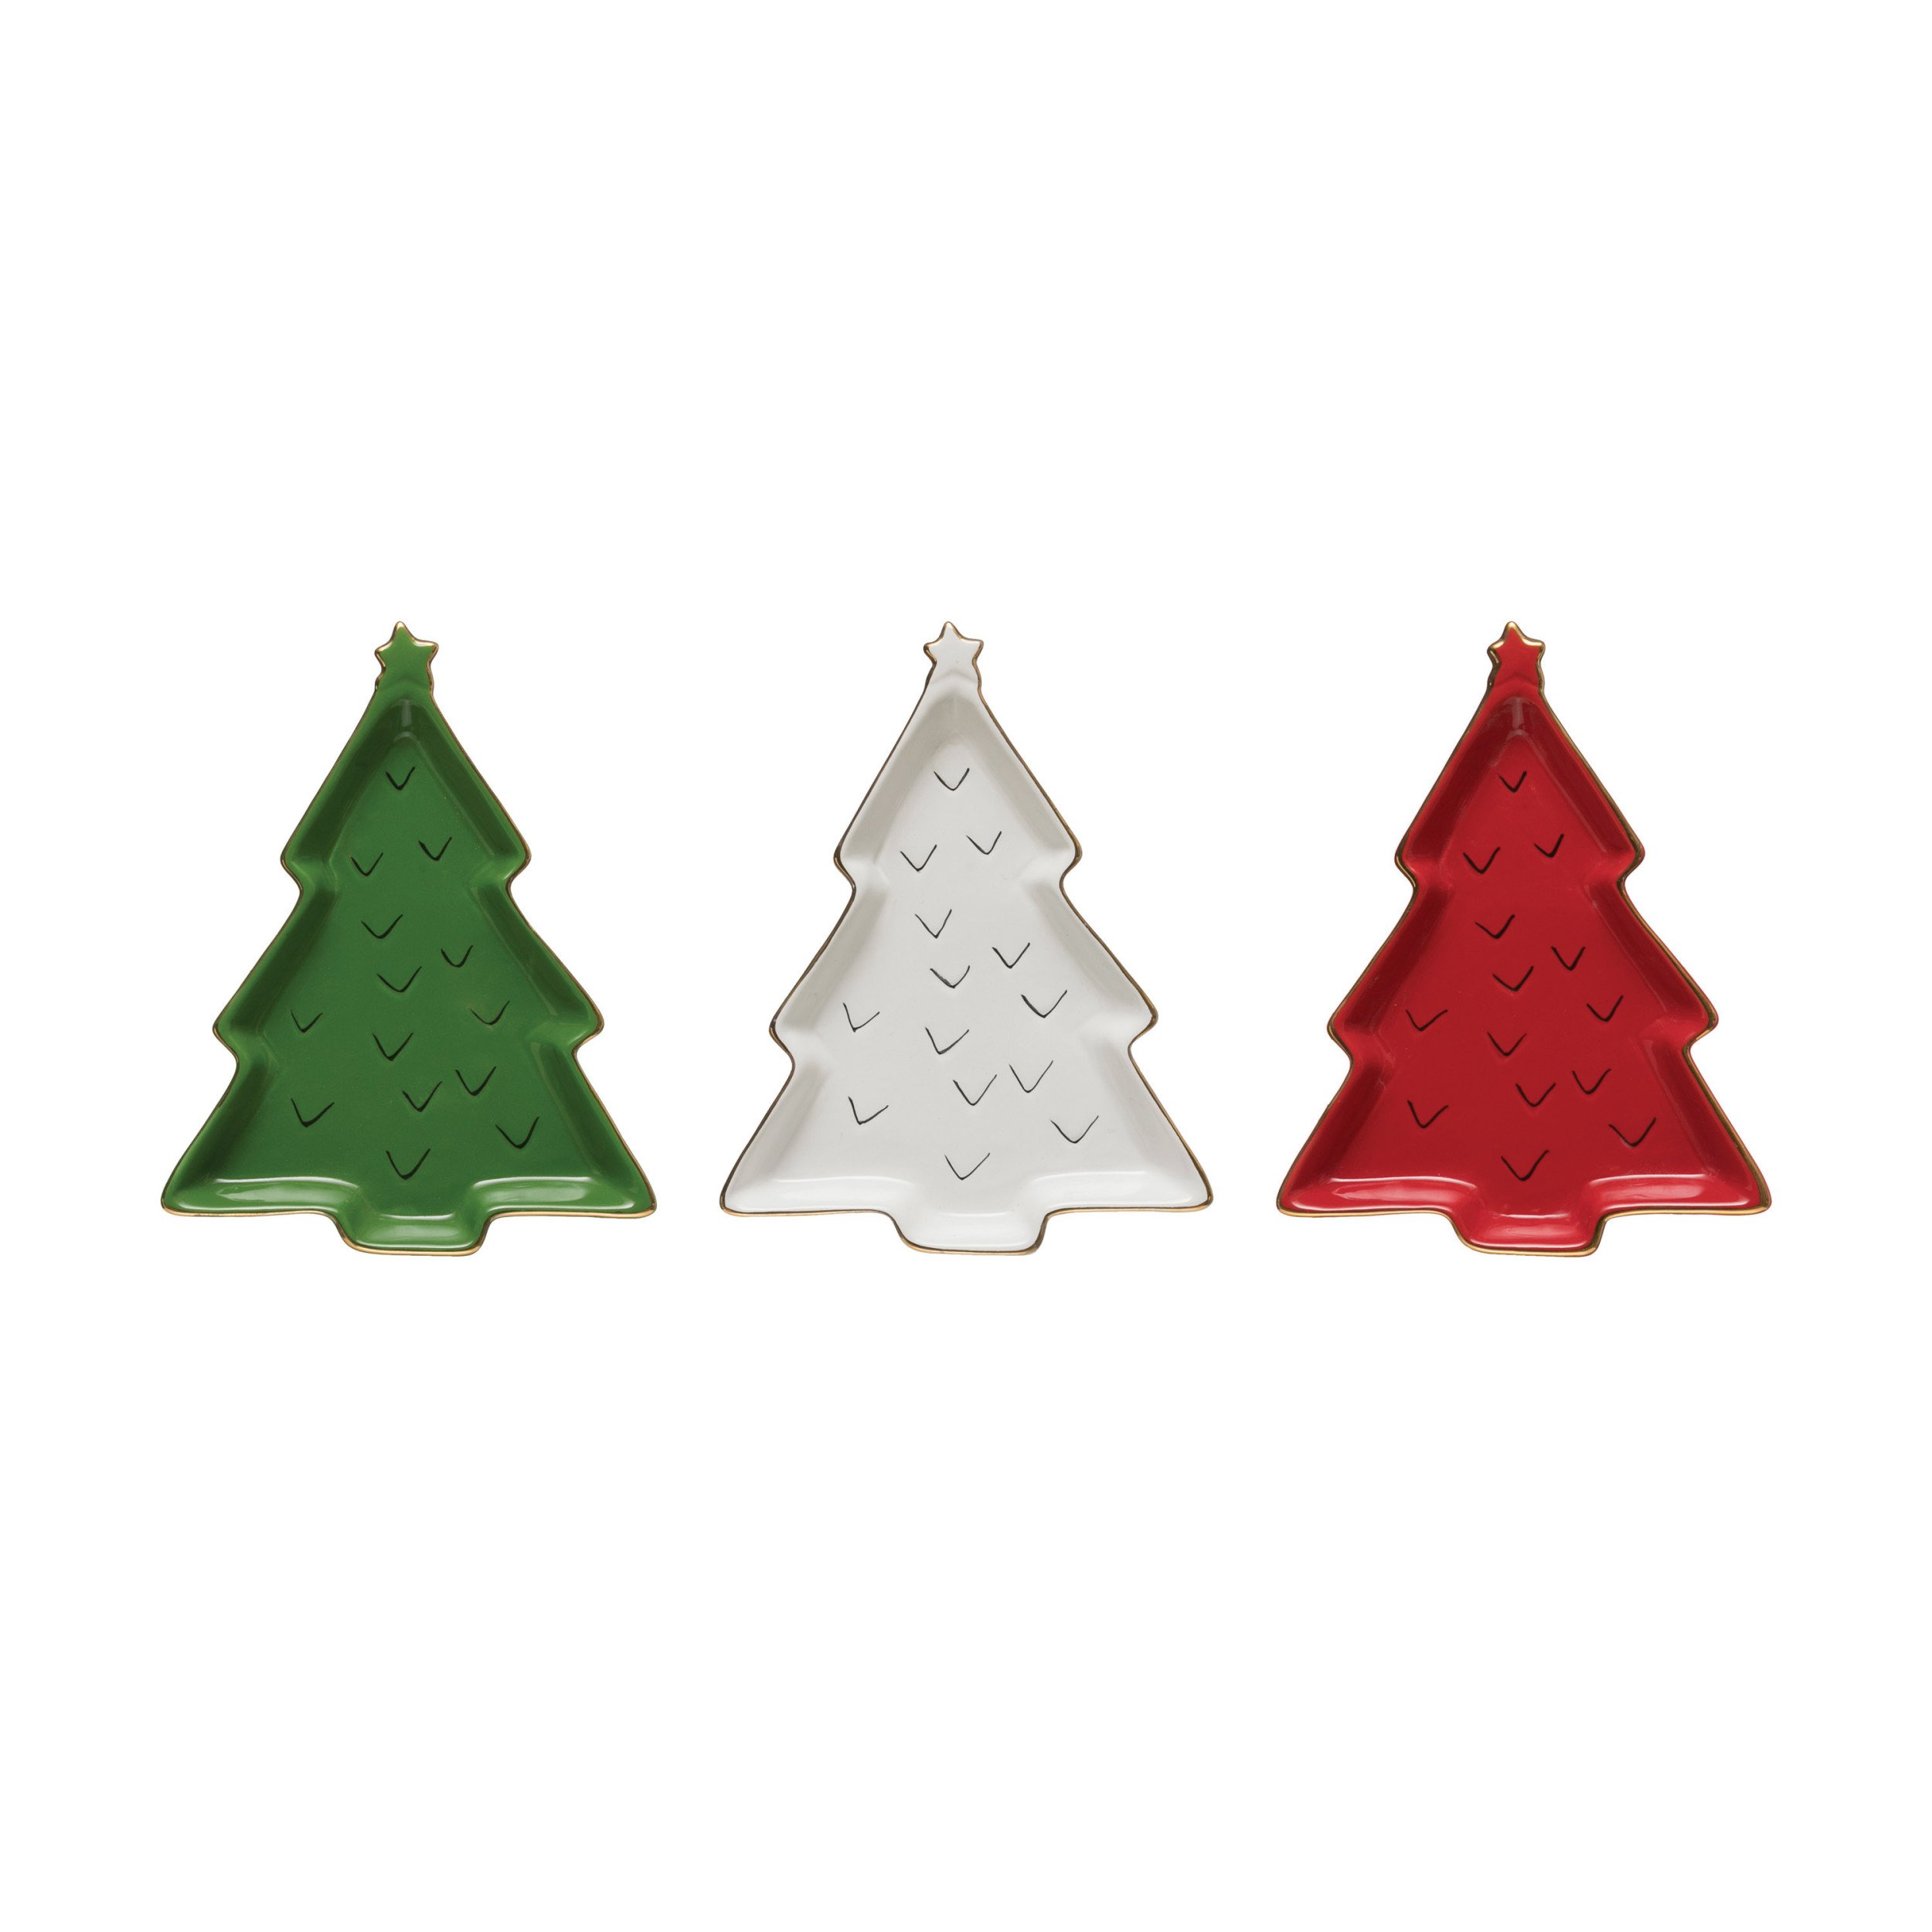 Creative Co-op 5" Glass Nutcracker Soldiers Christmas Tree Ornaments Set of 3 